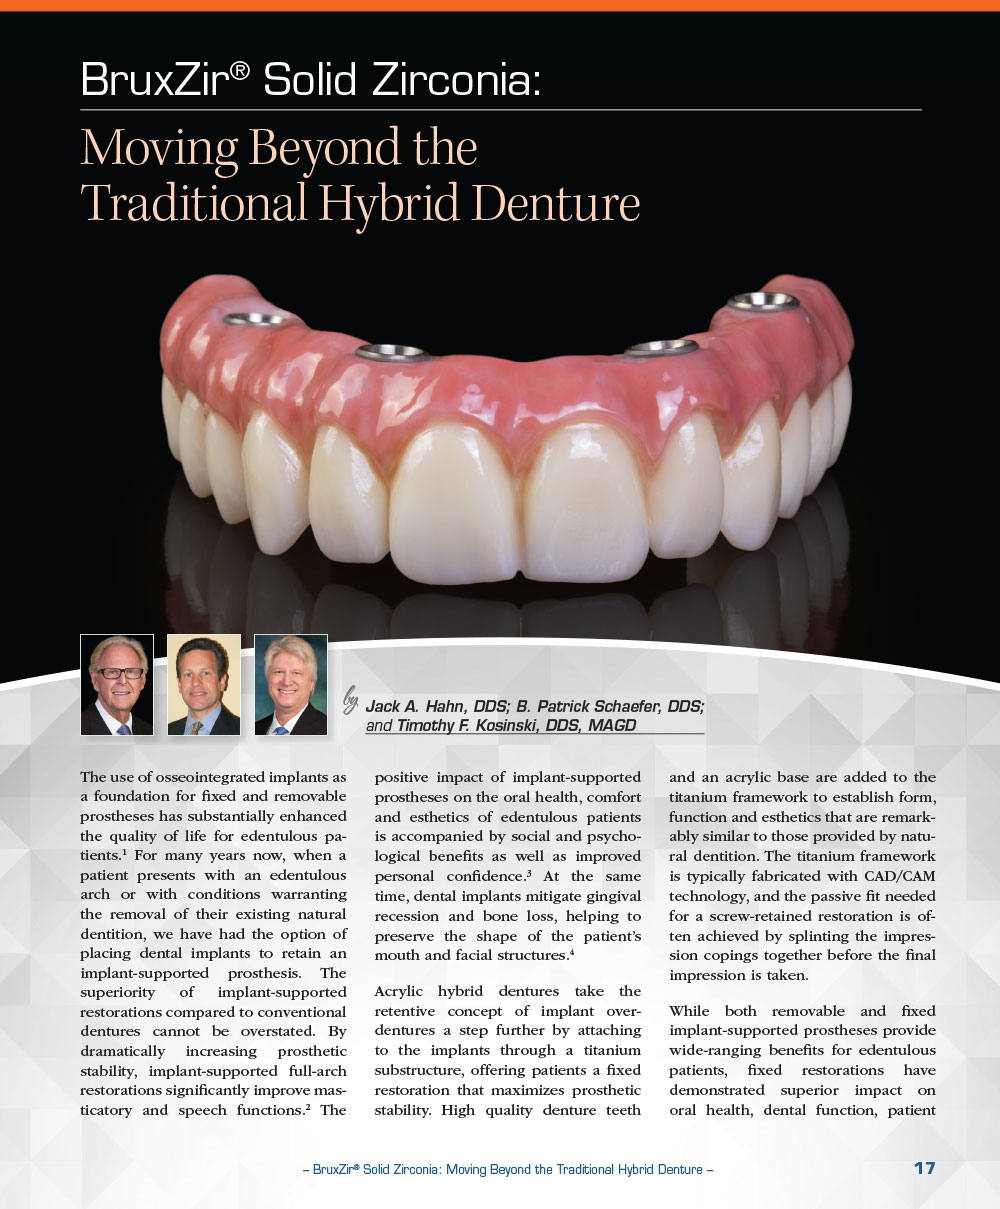 BruxZir® Solid Zirconia: Moving Beyond the Traditional Hybrid Denture